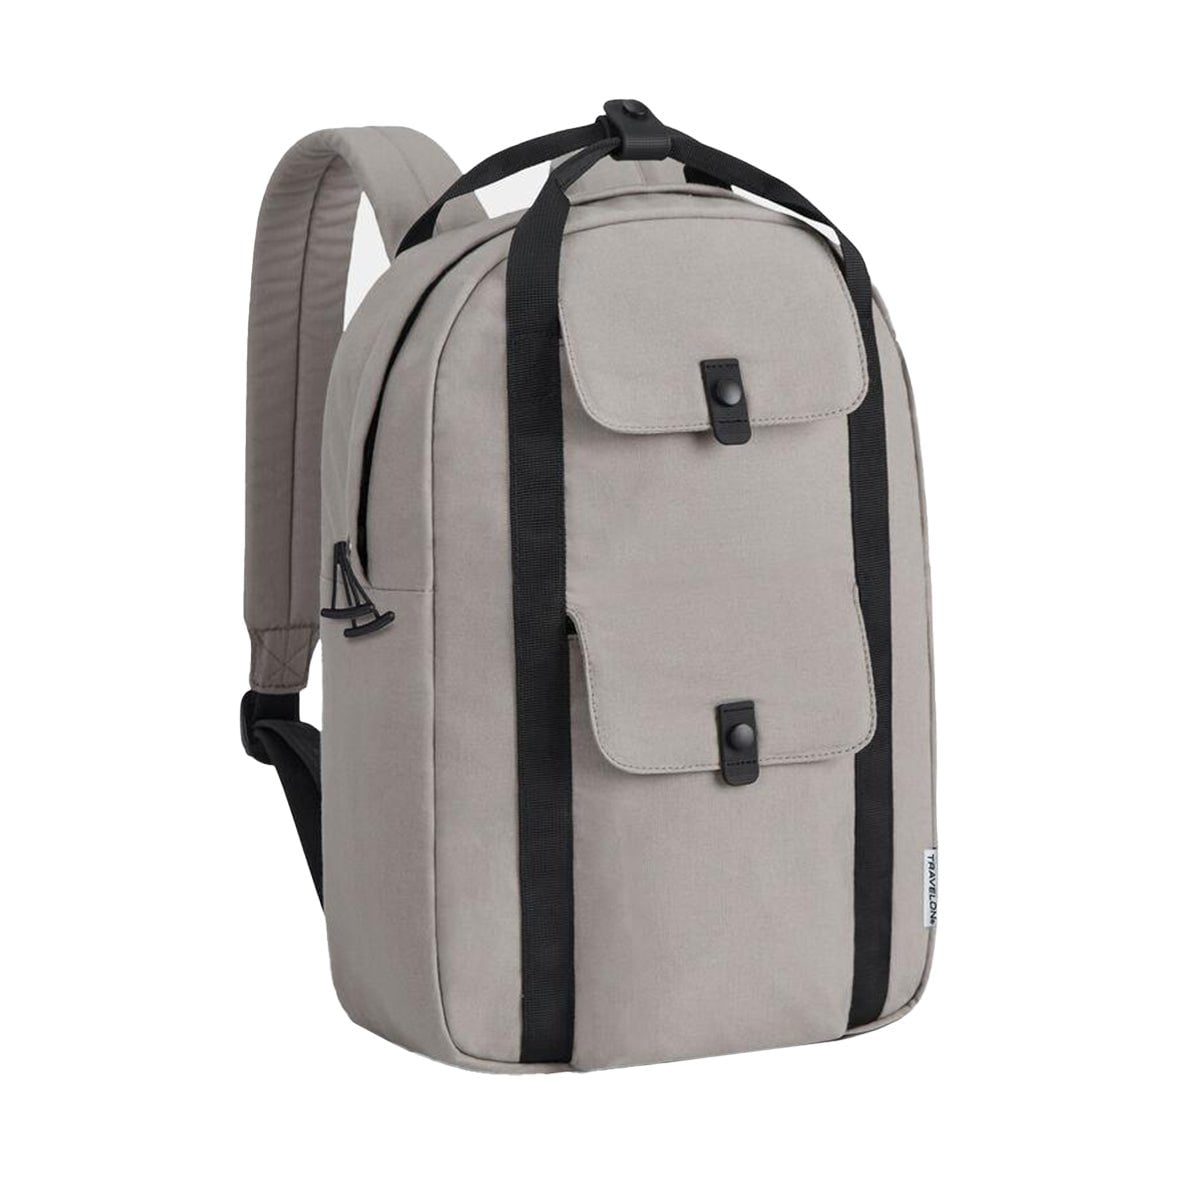 Travelon Origin Sustainable Antimicrobial Anti-Theft Daypack - Driftwood